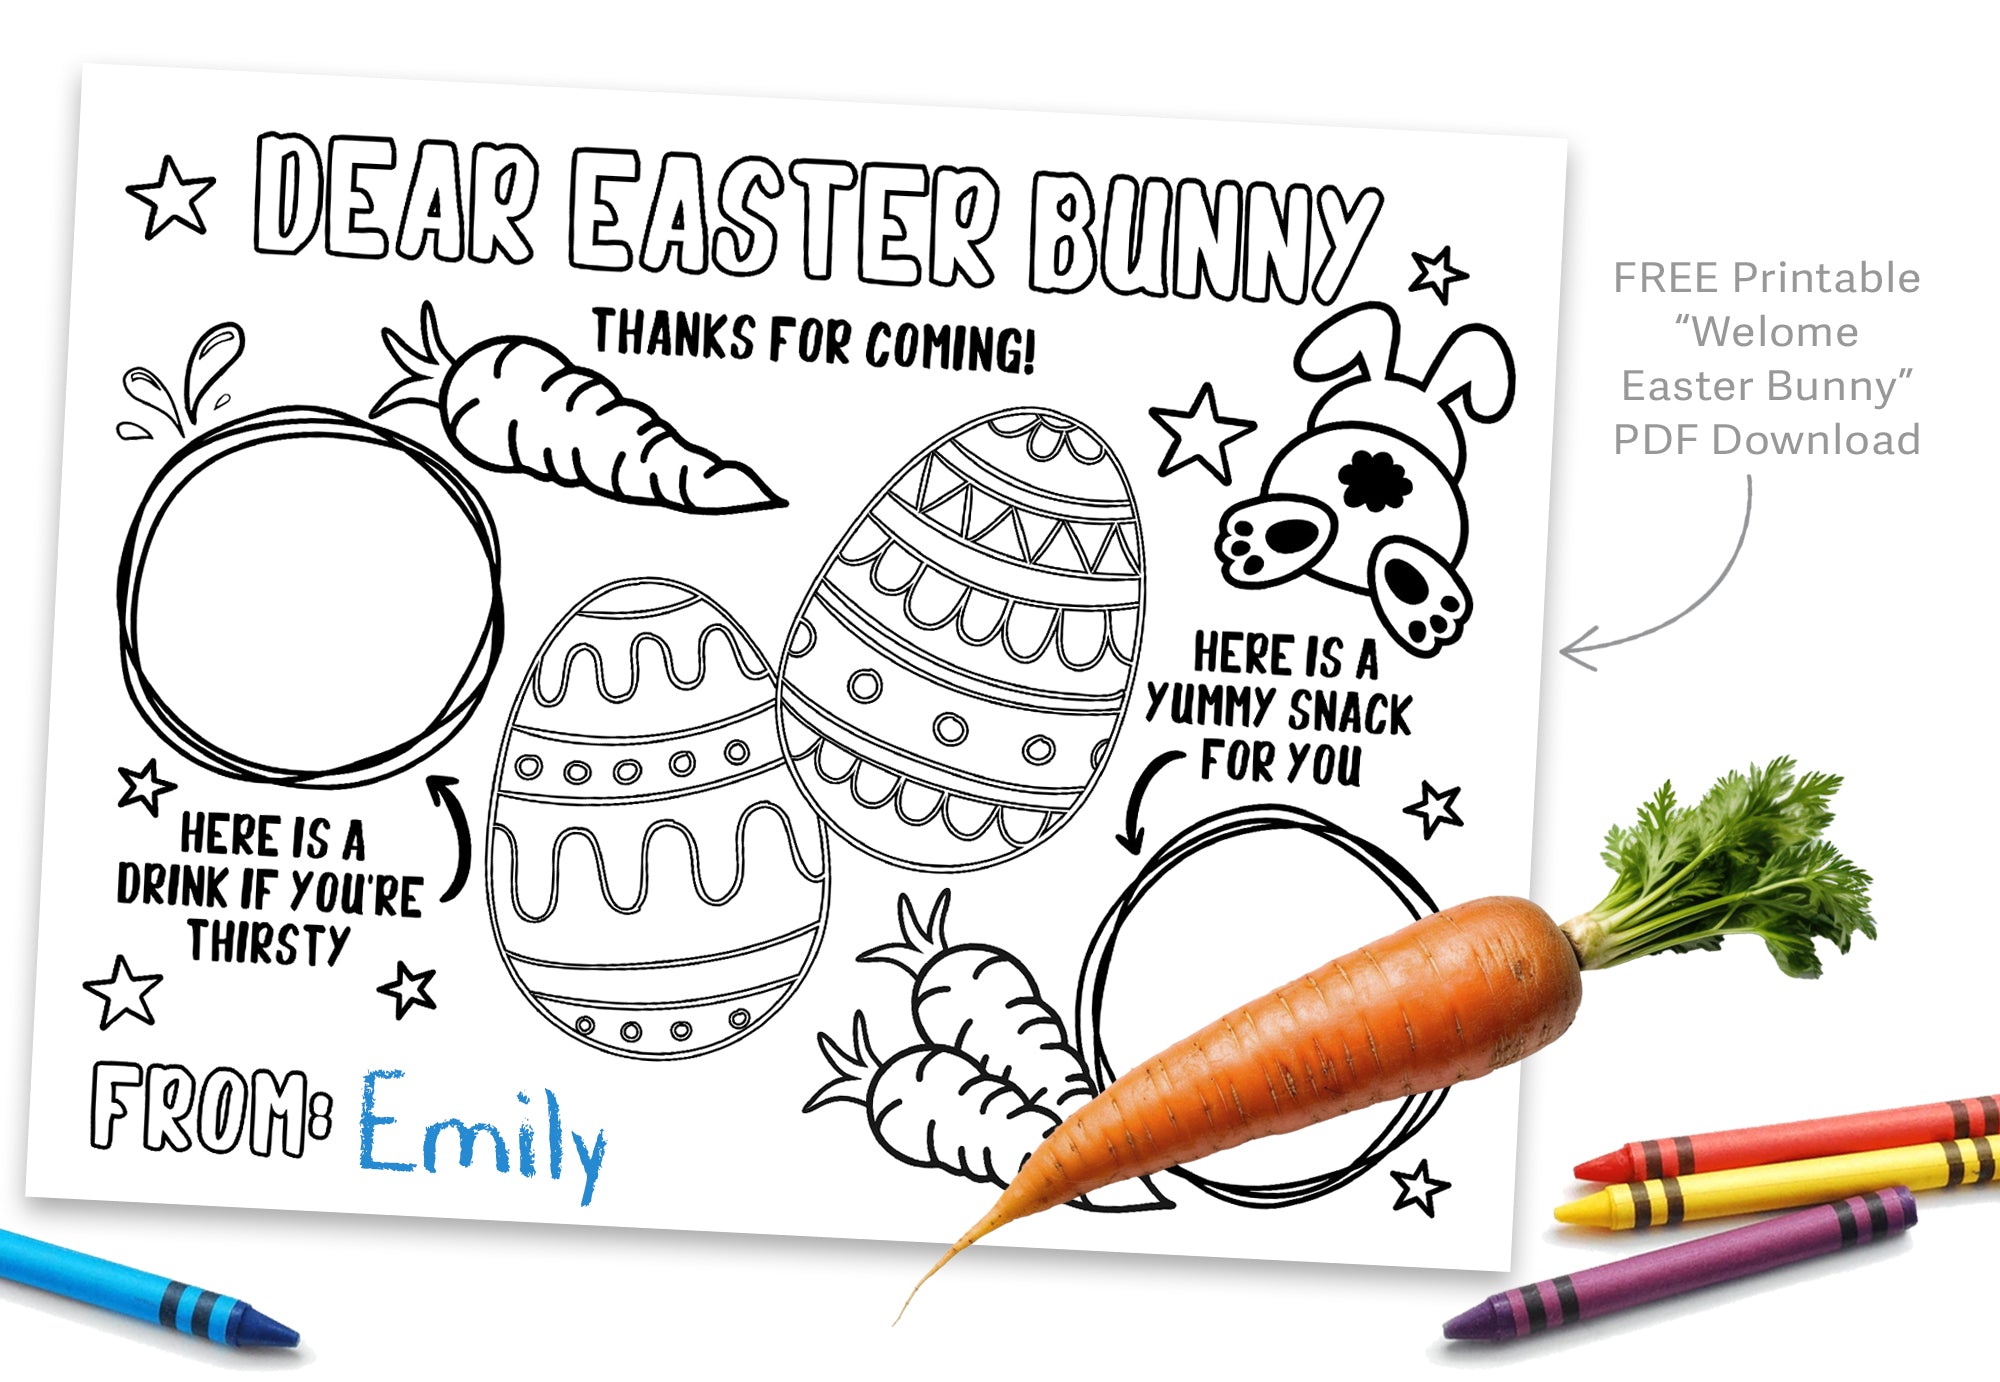 Free Welcome Easter Bunny Coloring Page for kids